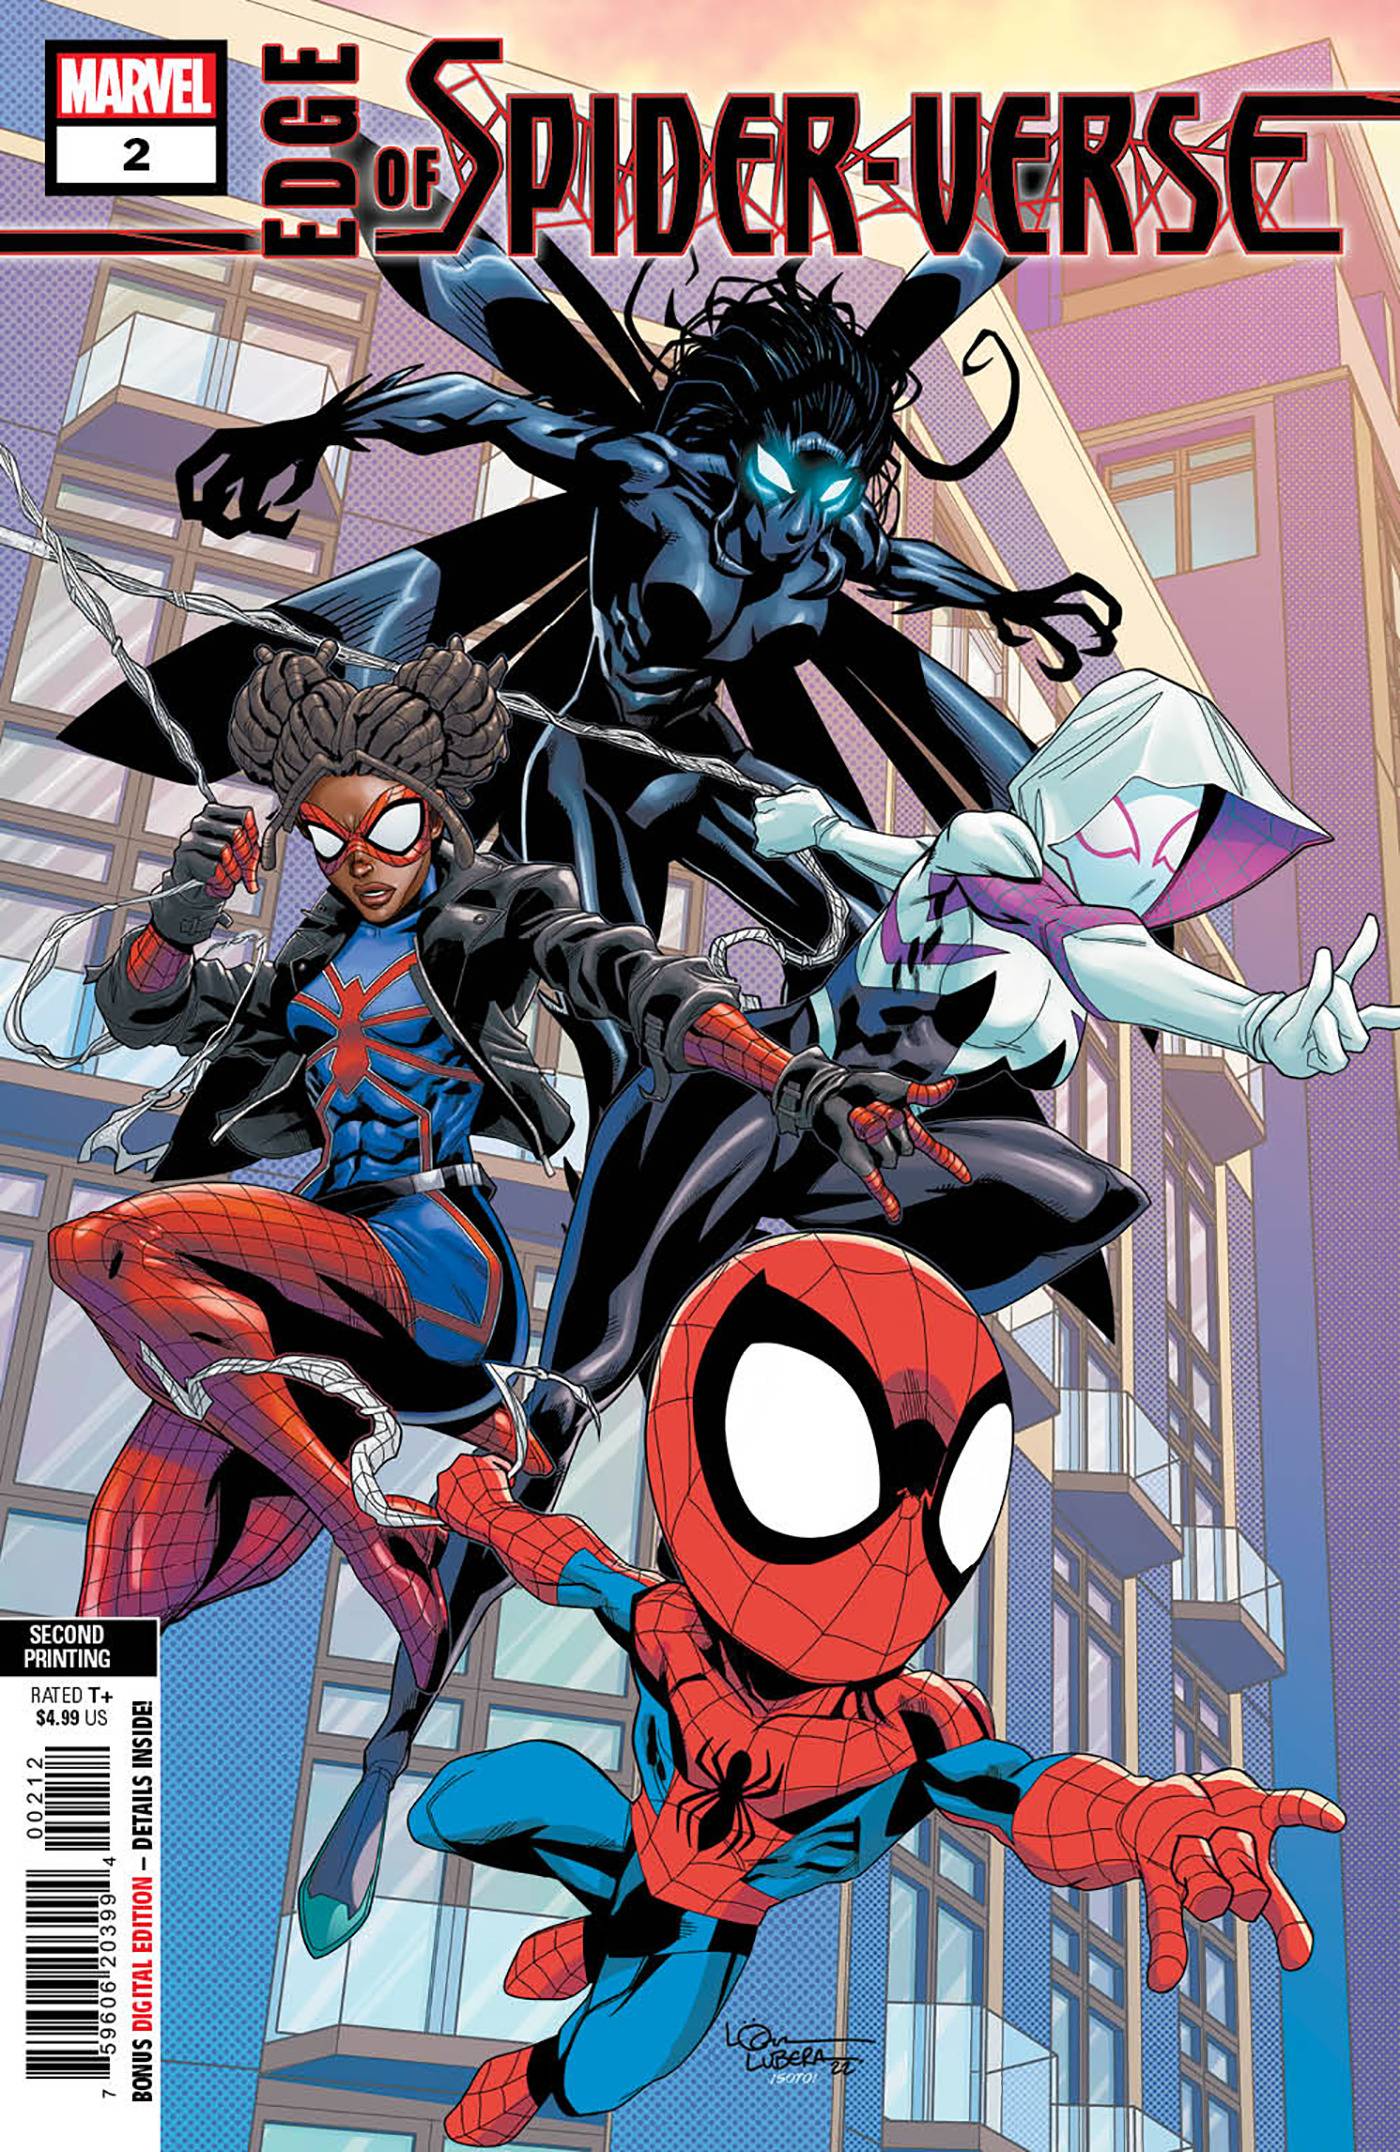 09/28/2022 EDGE OF SPIDER-VERSE #2 (OF 5) 2ND PTG LUBERA VARIANT